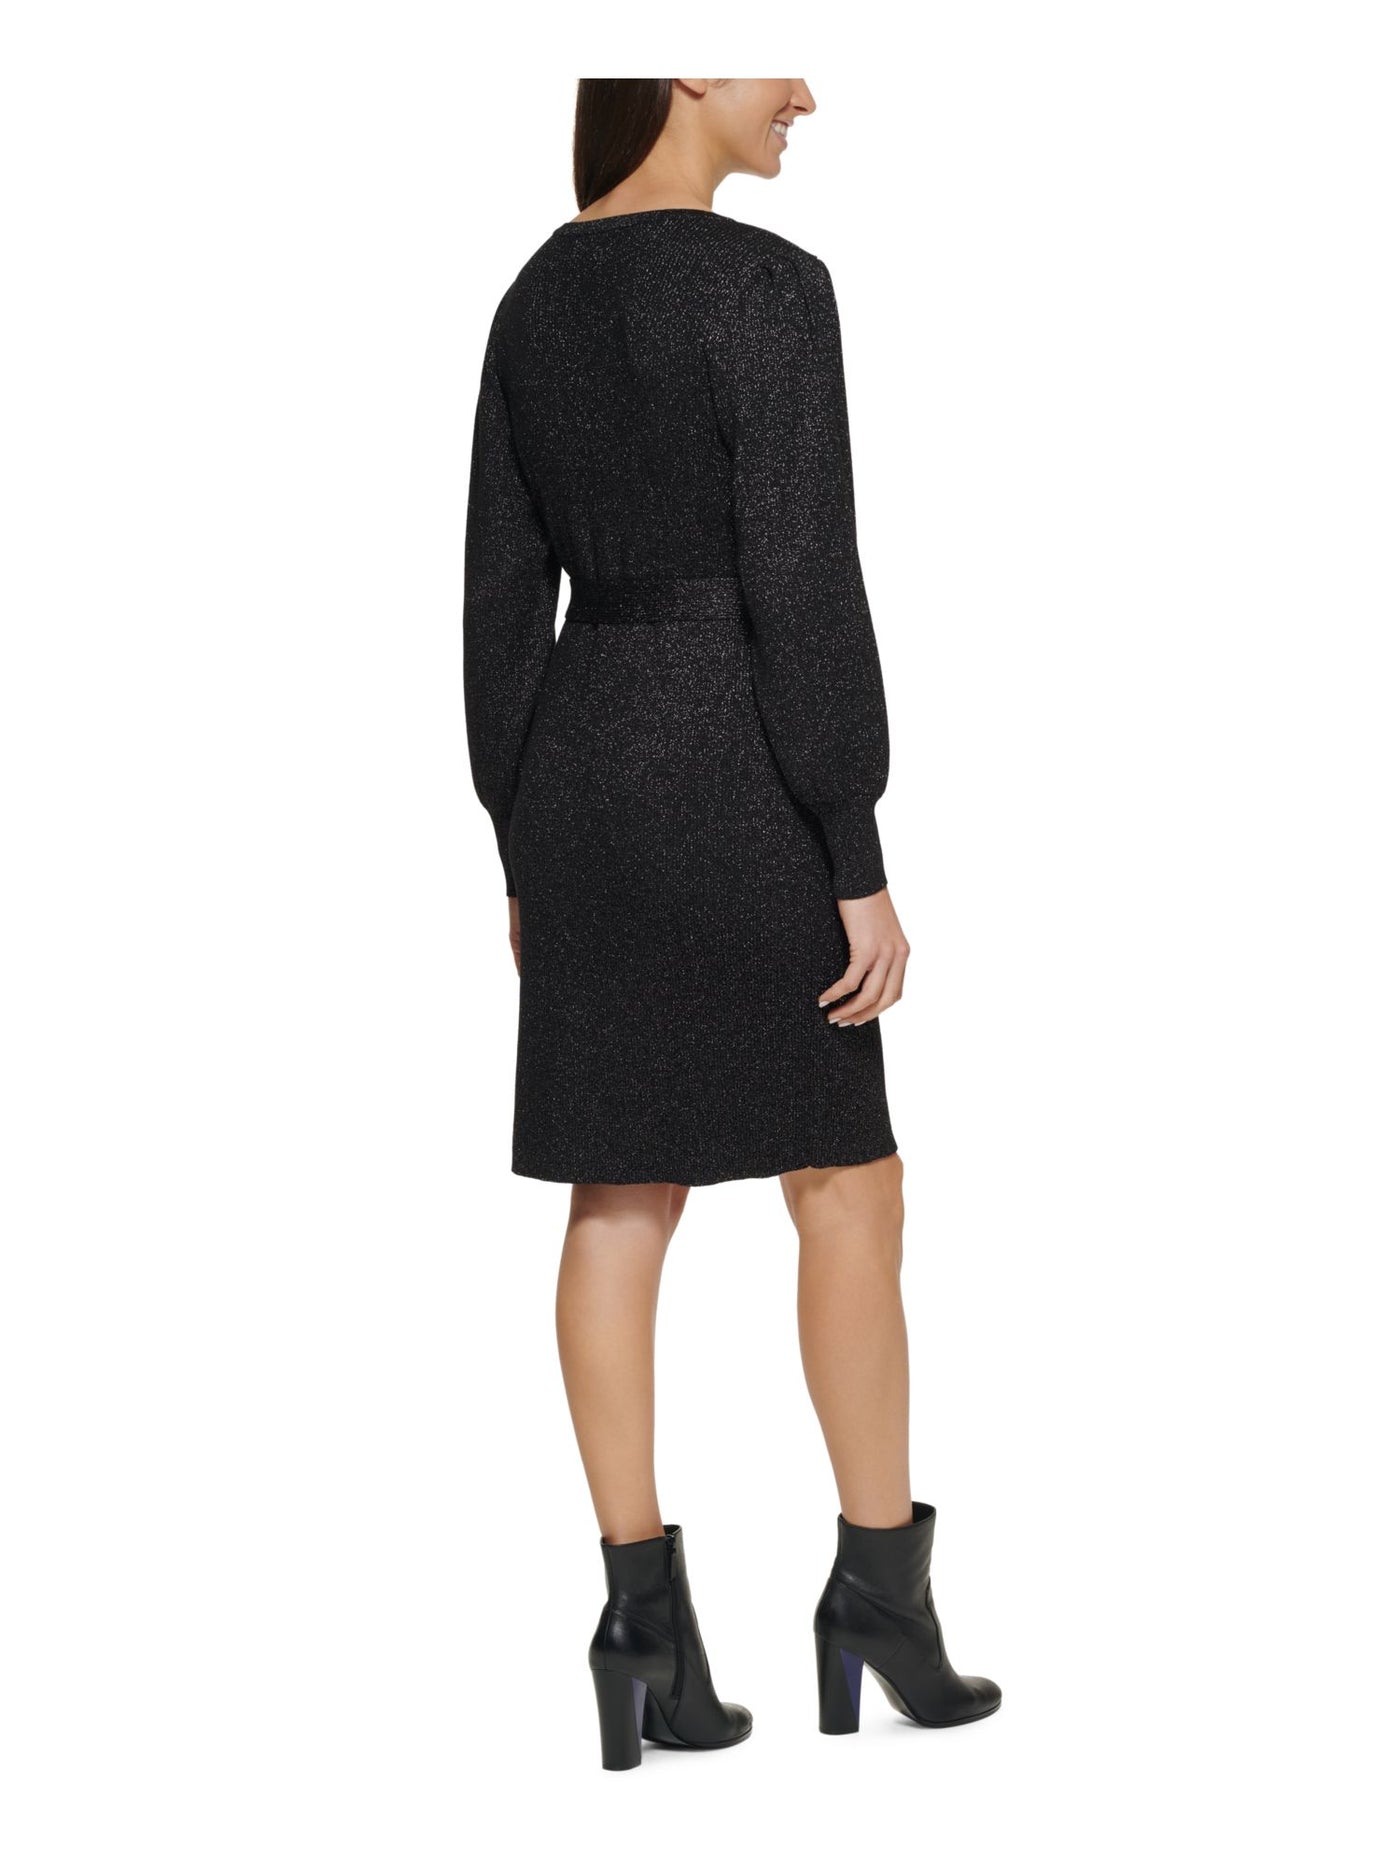 CALVIN KLEIN Womens Black Knit Metallic Ribbed Belted Long Sleeve Round Neck Above The Knee Party Sweater Dress S